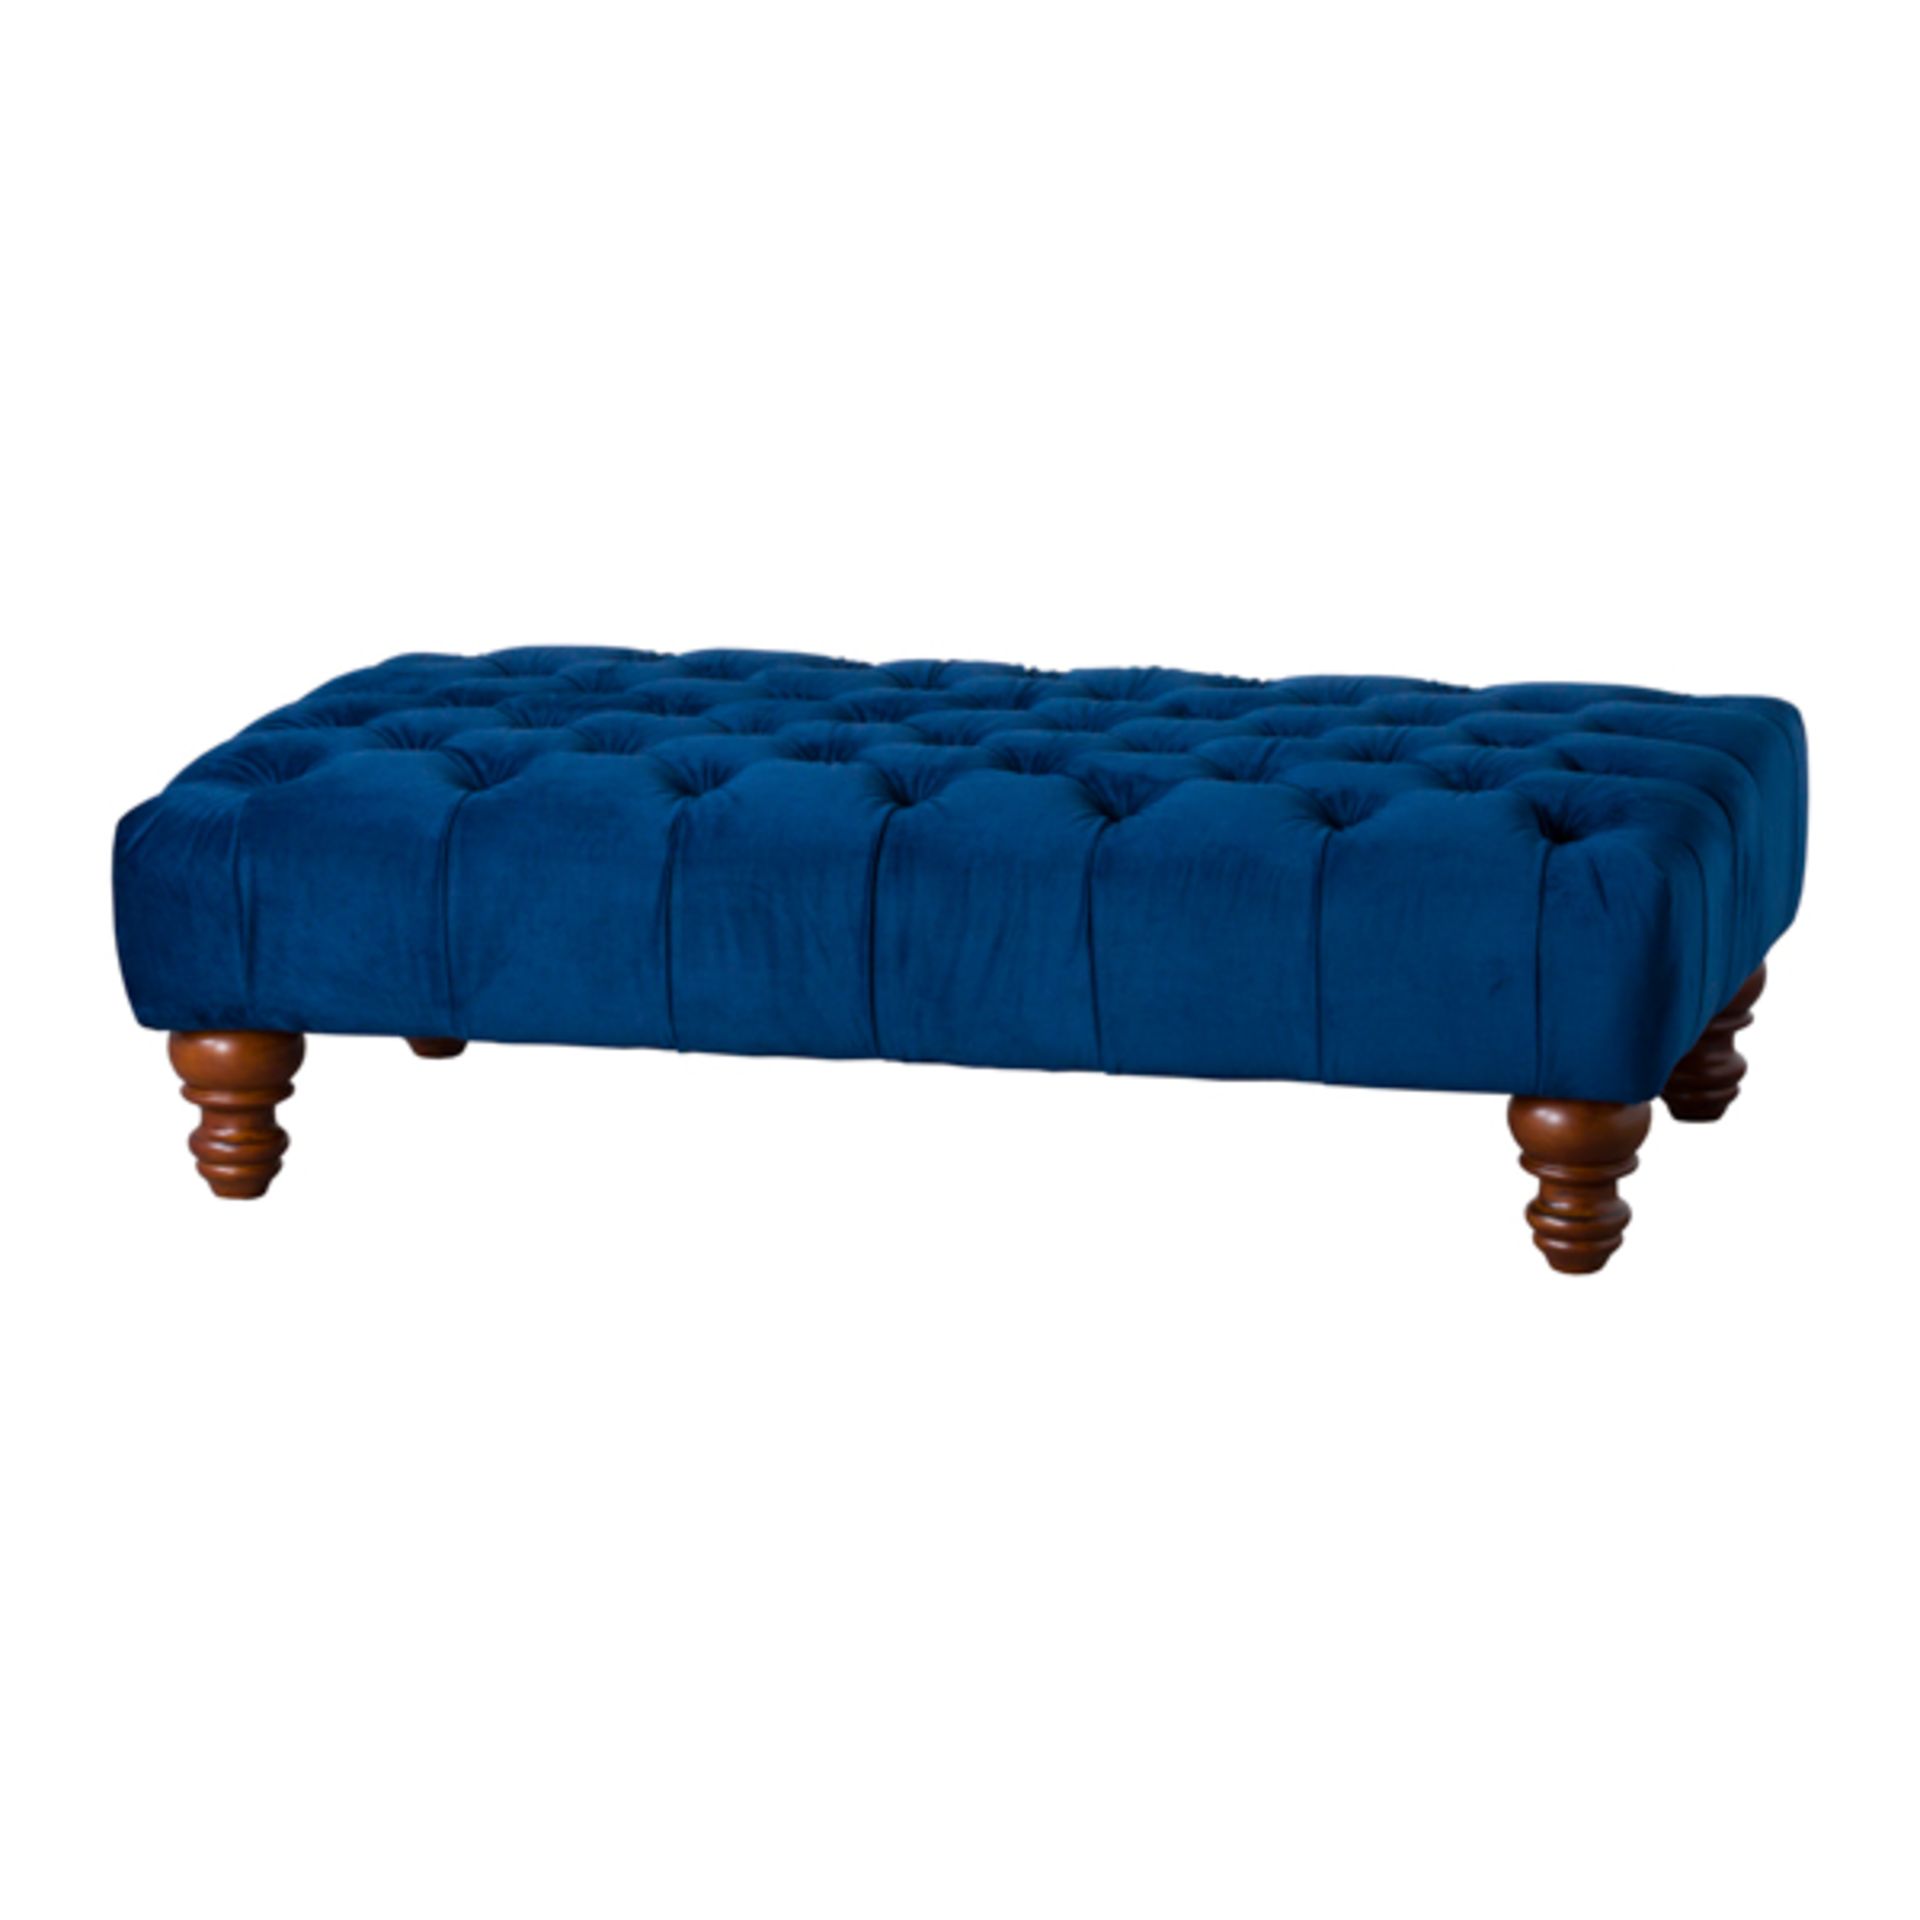 Benedict Tufted Rectangle Ottoman Grace your home interior with the timeless beauty of the